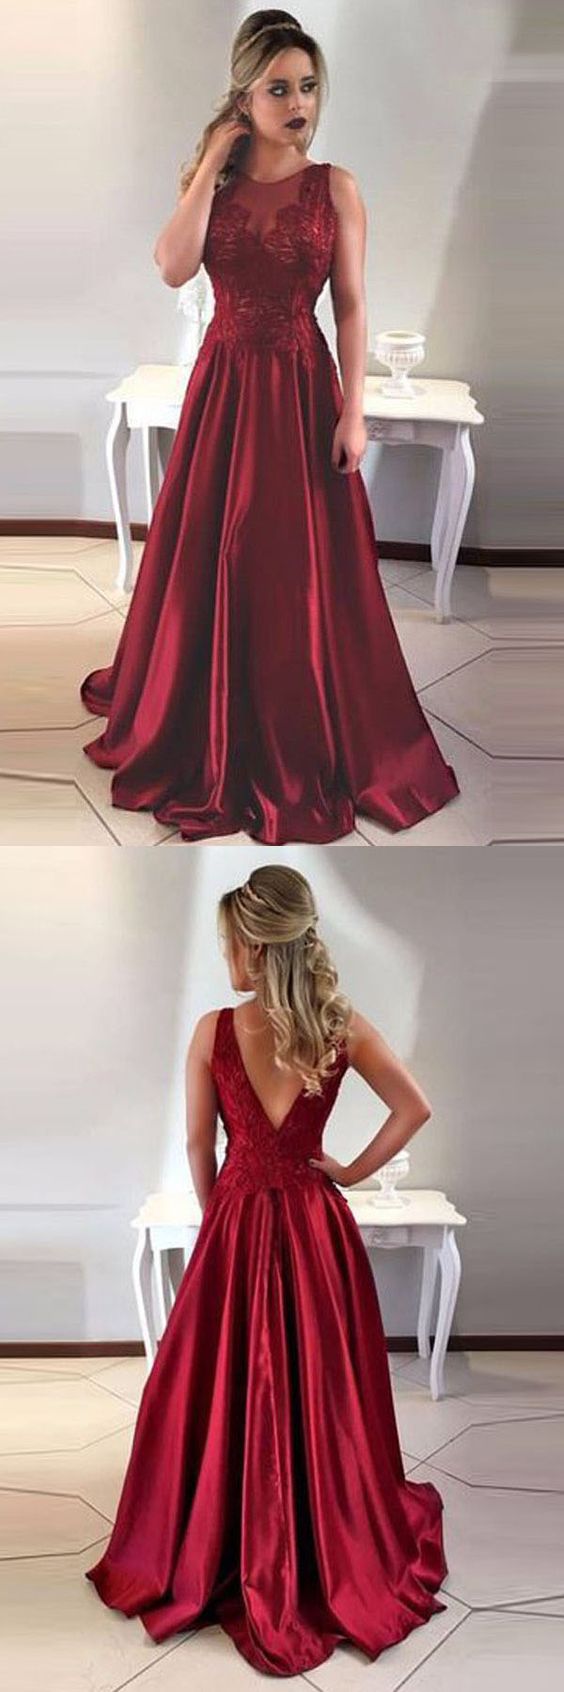 A-line Round Neck V-back Maroon Satin Prom Dresses With Lace M0826